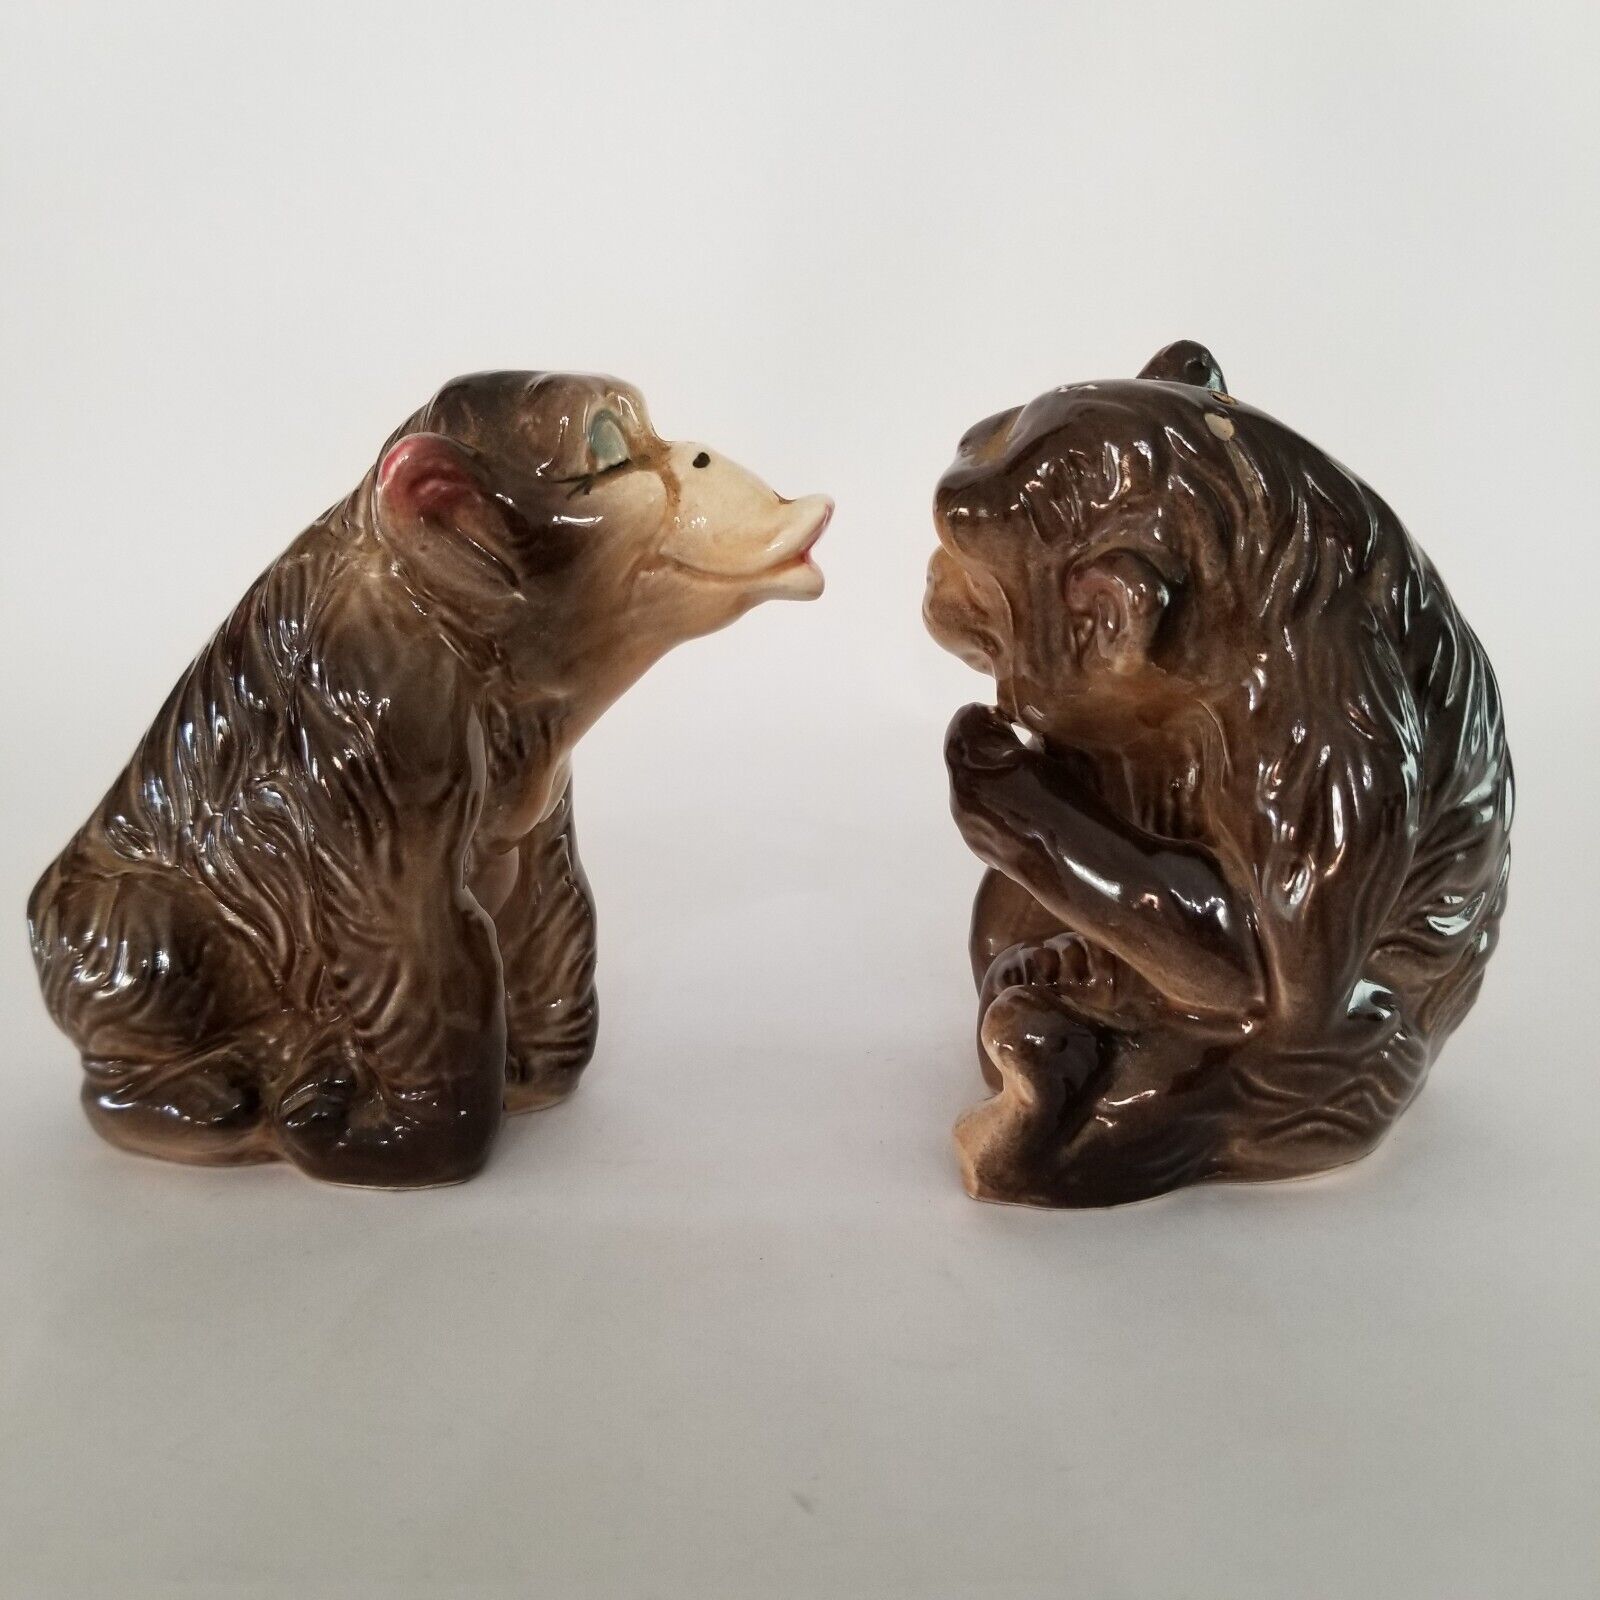 Vintage Monkey Salt And Pepper Shakers Kriess Japan 4 Inches Tall